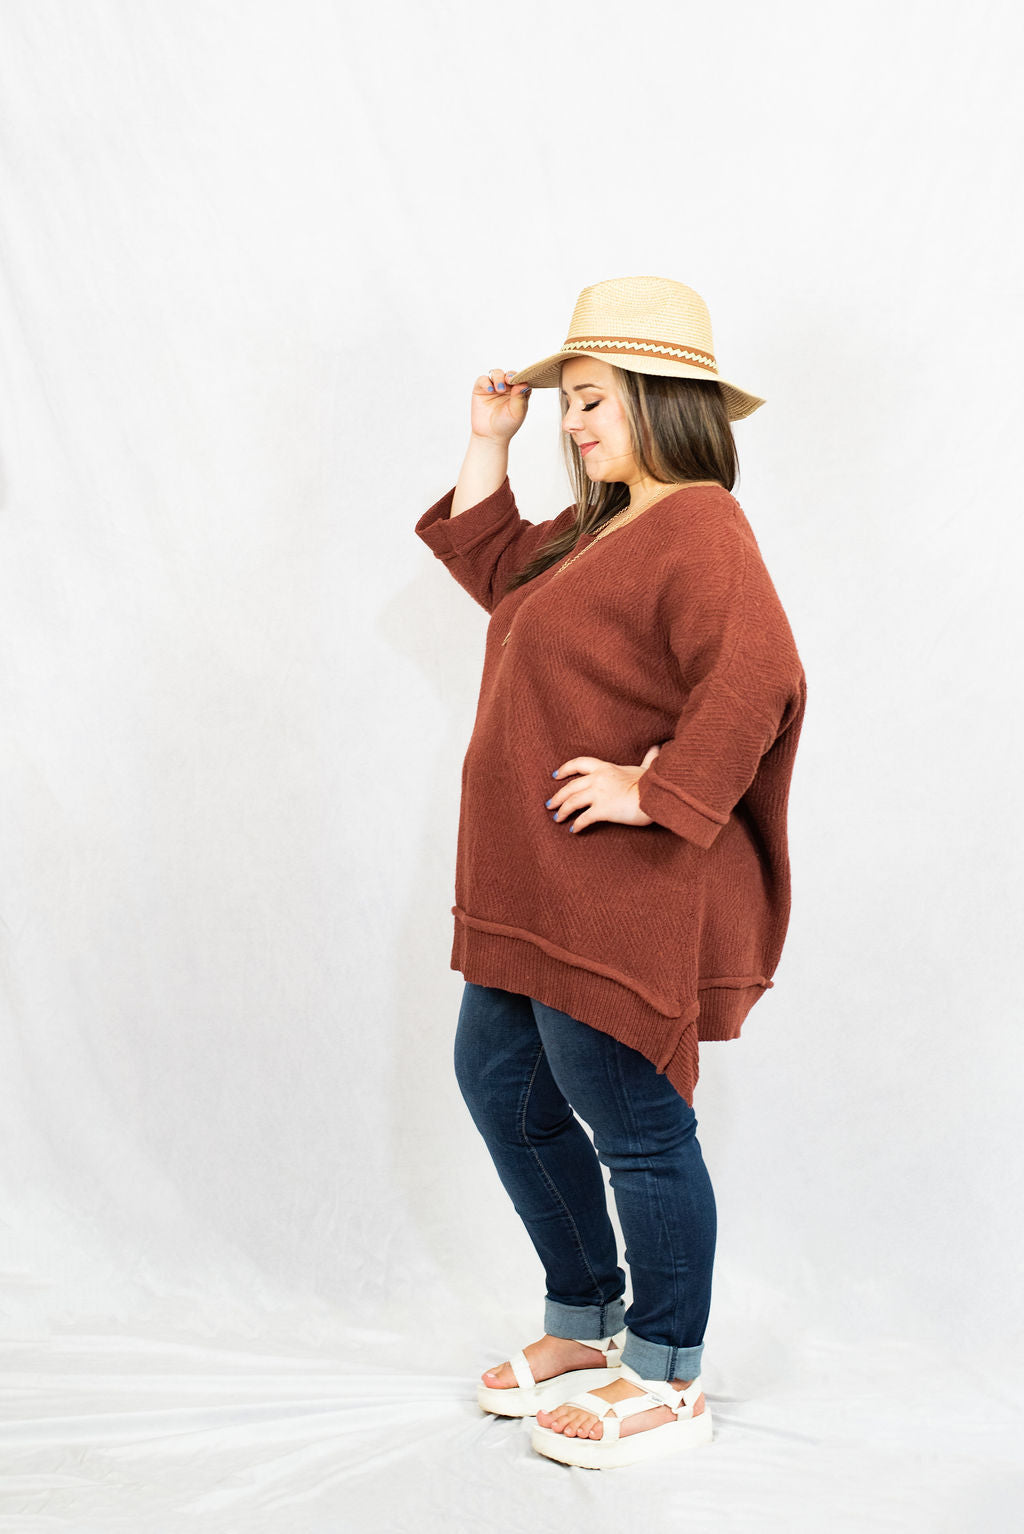 Asymmetrical Knit Top in Plus Size by Entro Clothing